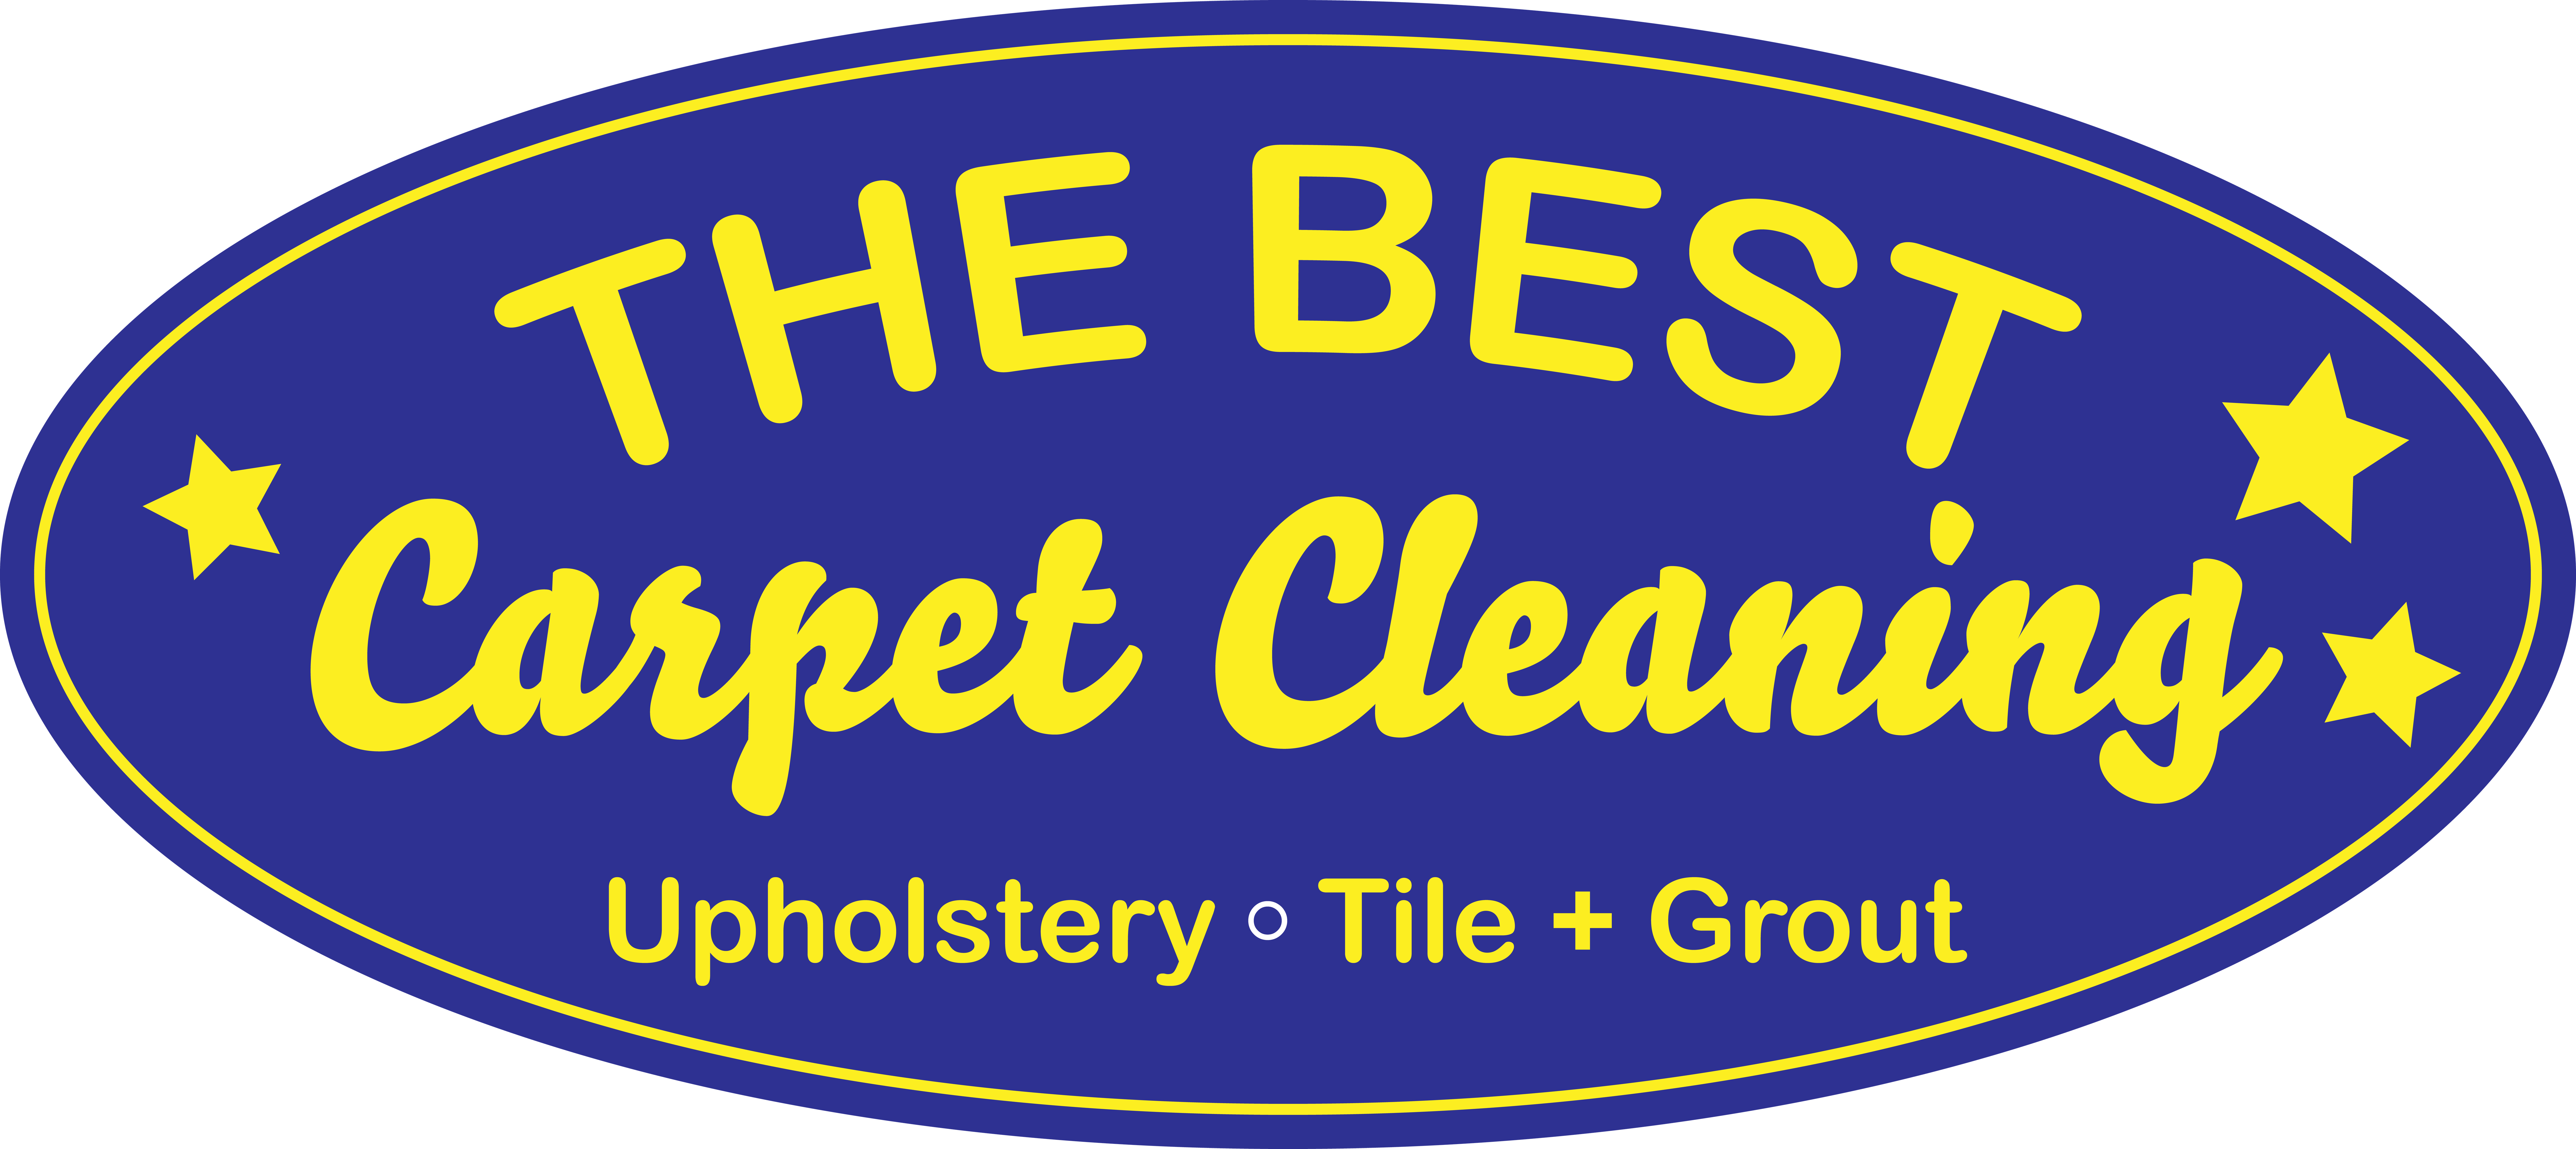 The Best Carpet Cleaning